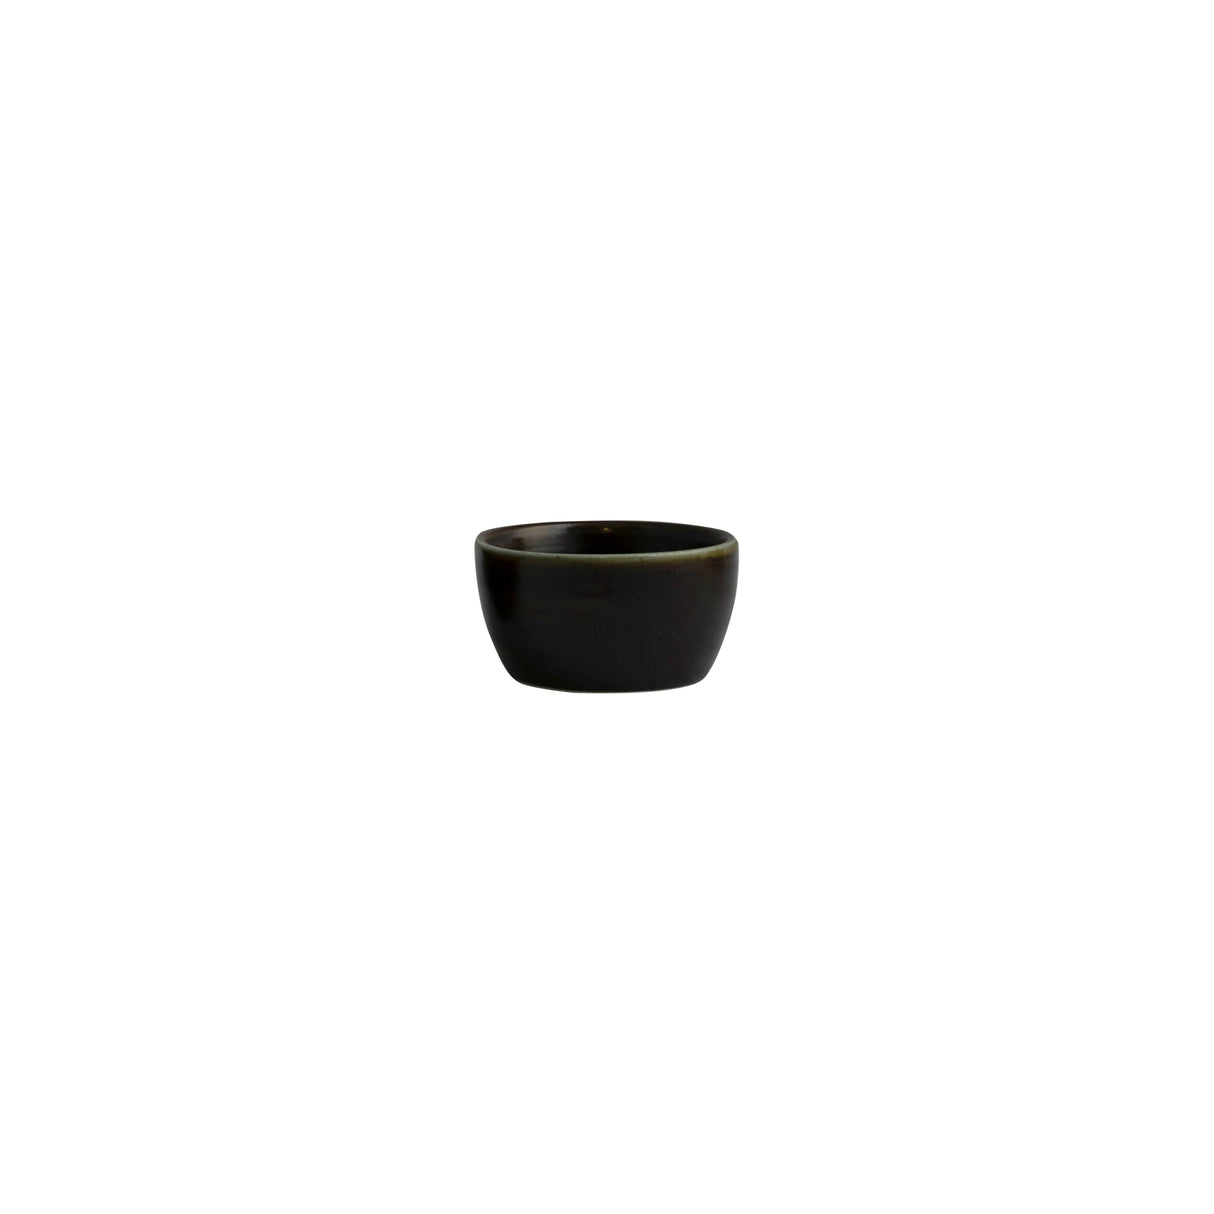 Ramekin - 70Ml, Earth from Moda Porcelain. made out of Porcelain and sold in boxes of 12. Hospitality quality at wholesale price with The Flying Fork! 